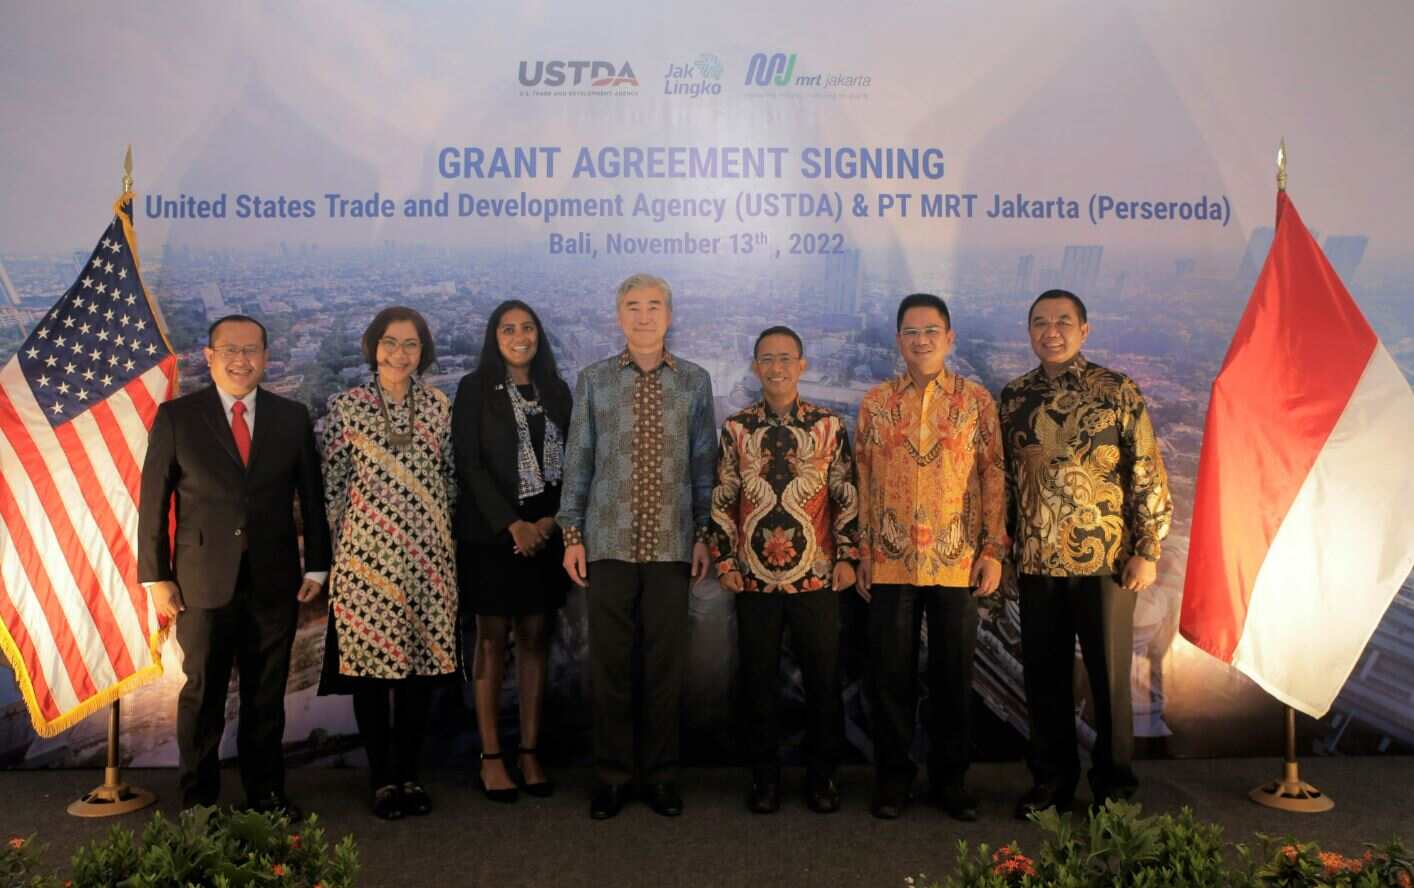 MRT Jakarta and the United States Trade and Development Agency are Partners in Sustainable Public Transit